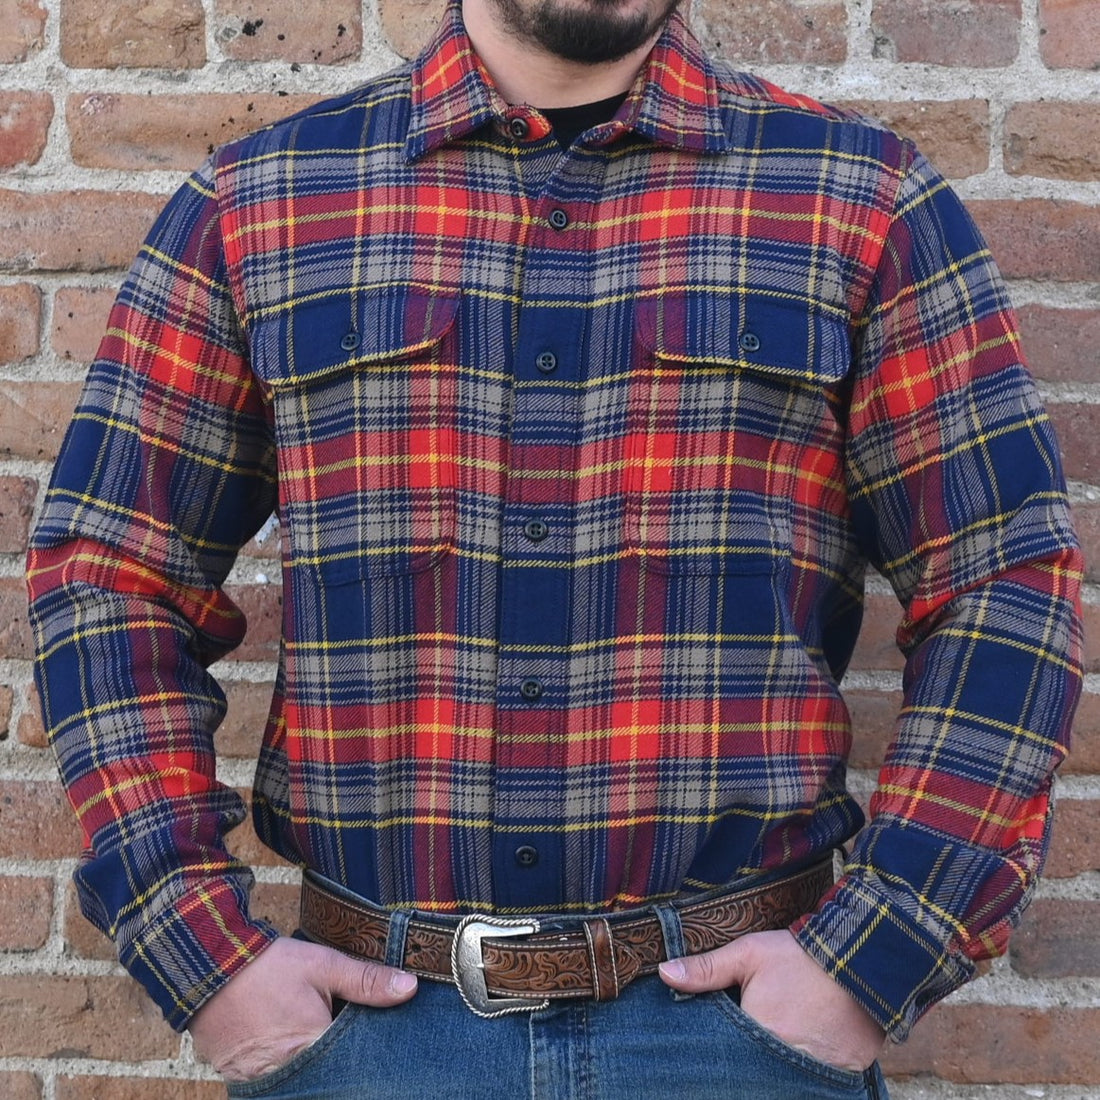 Filson Vintage Flannel Work Shirt view in red plaid color